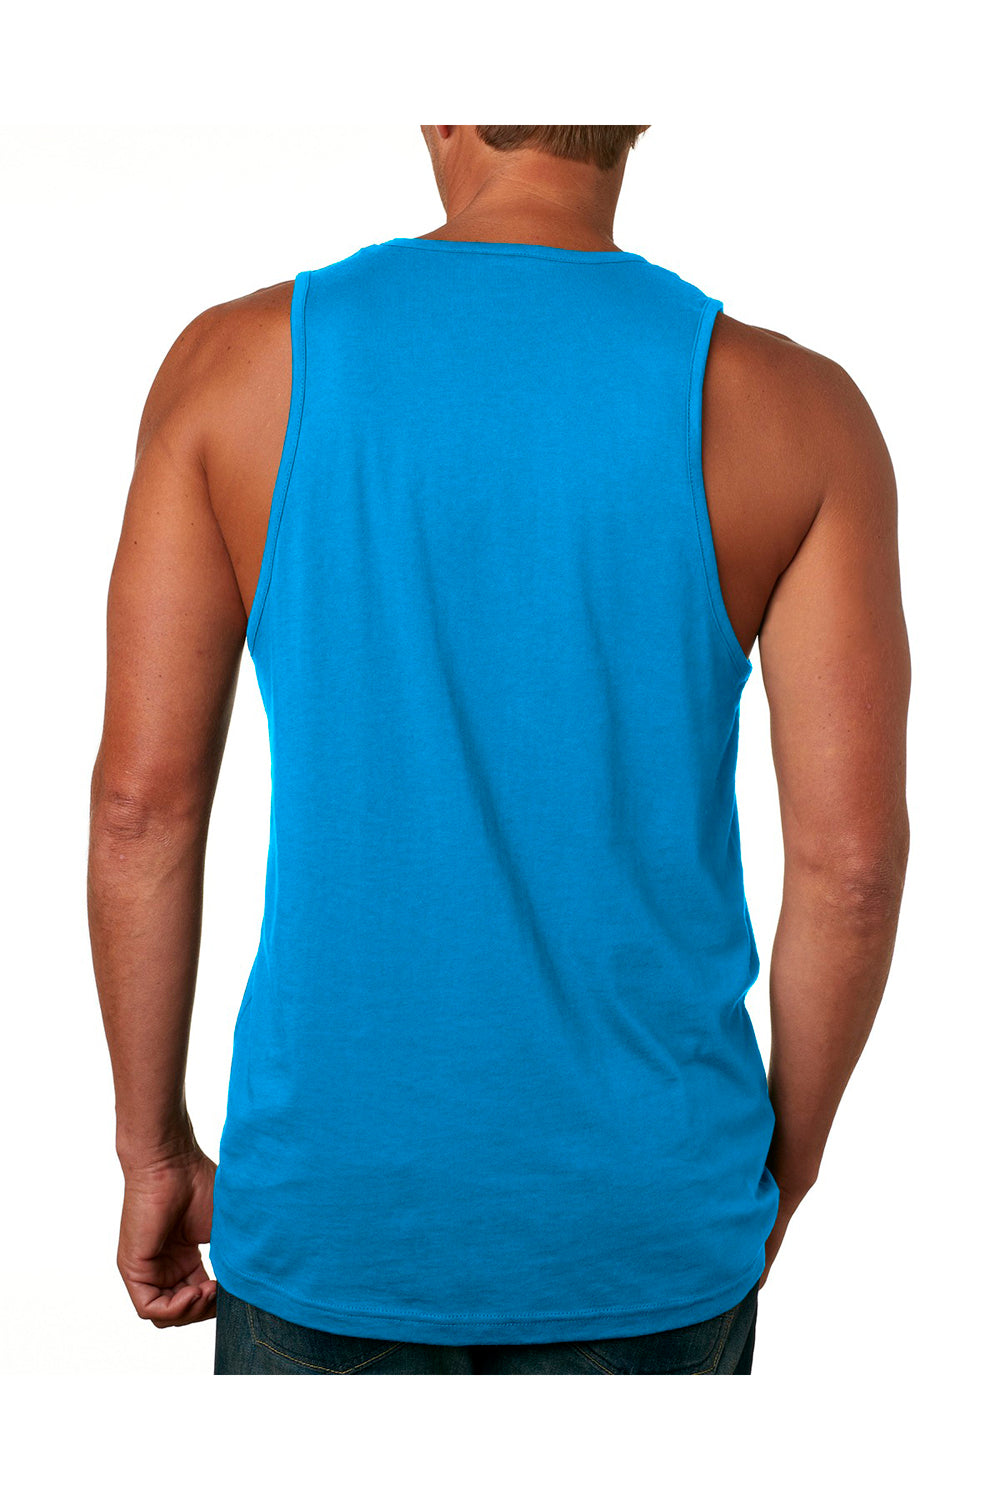 Next Level 3633 Mens Tank Top Turquoise Blue Back